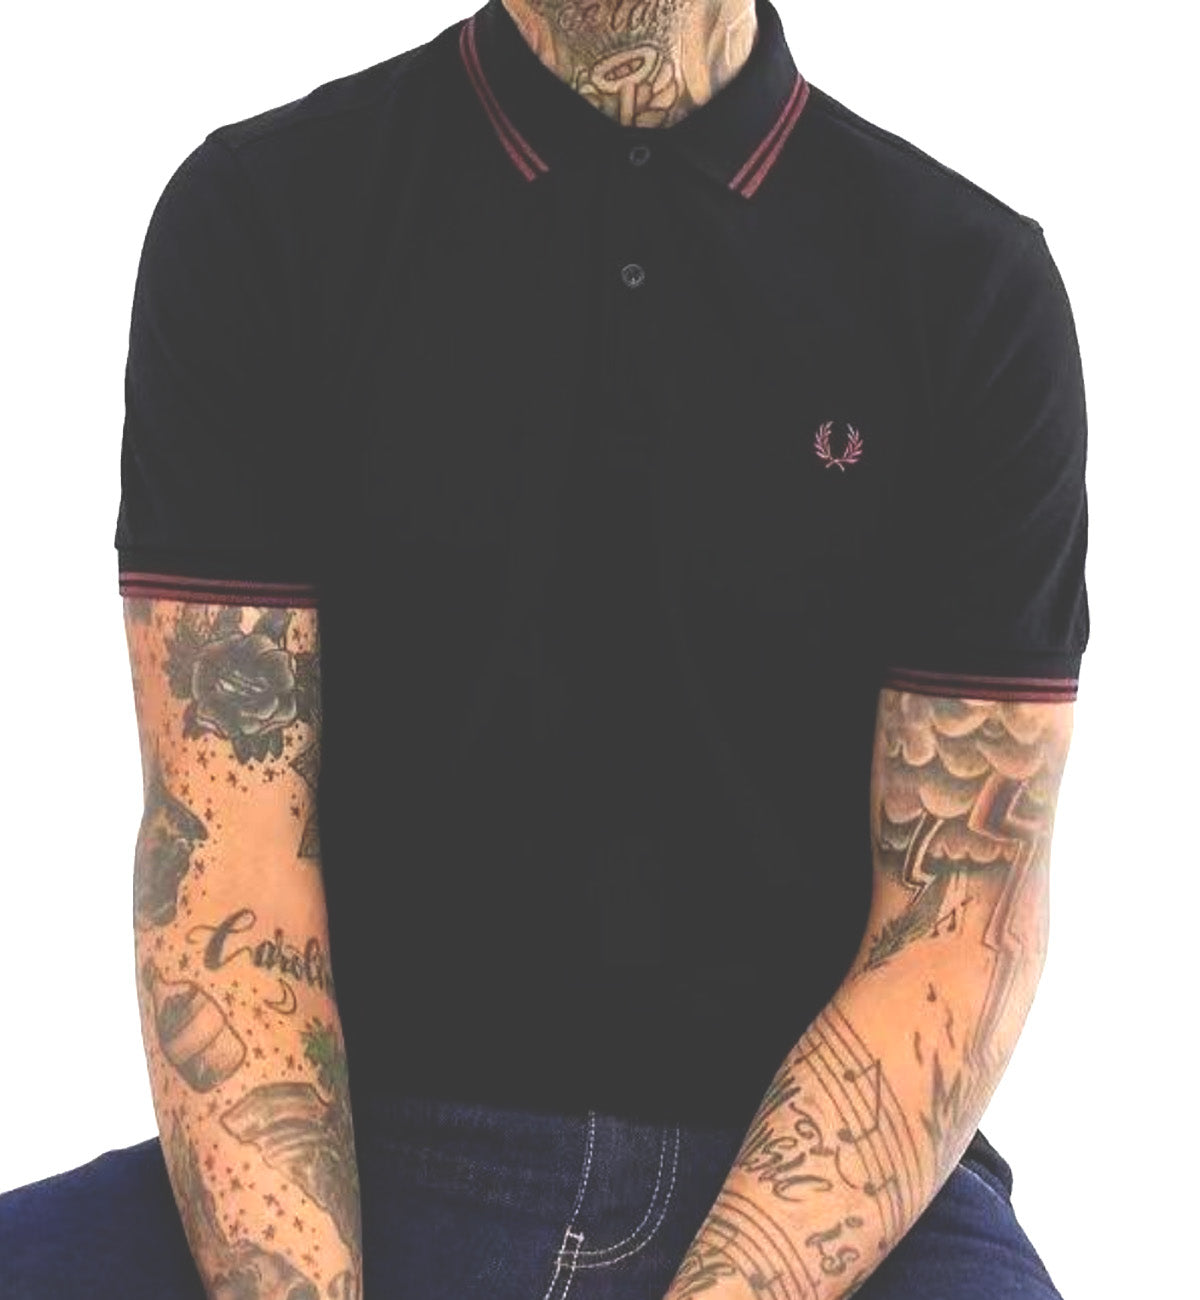 Fred Perry Red Double Stripe Black Polo Shirt